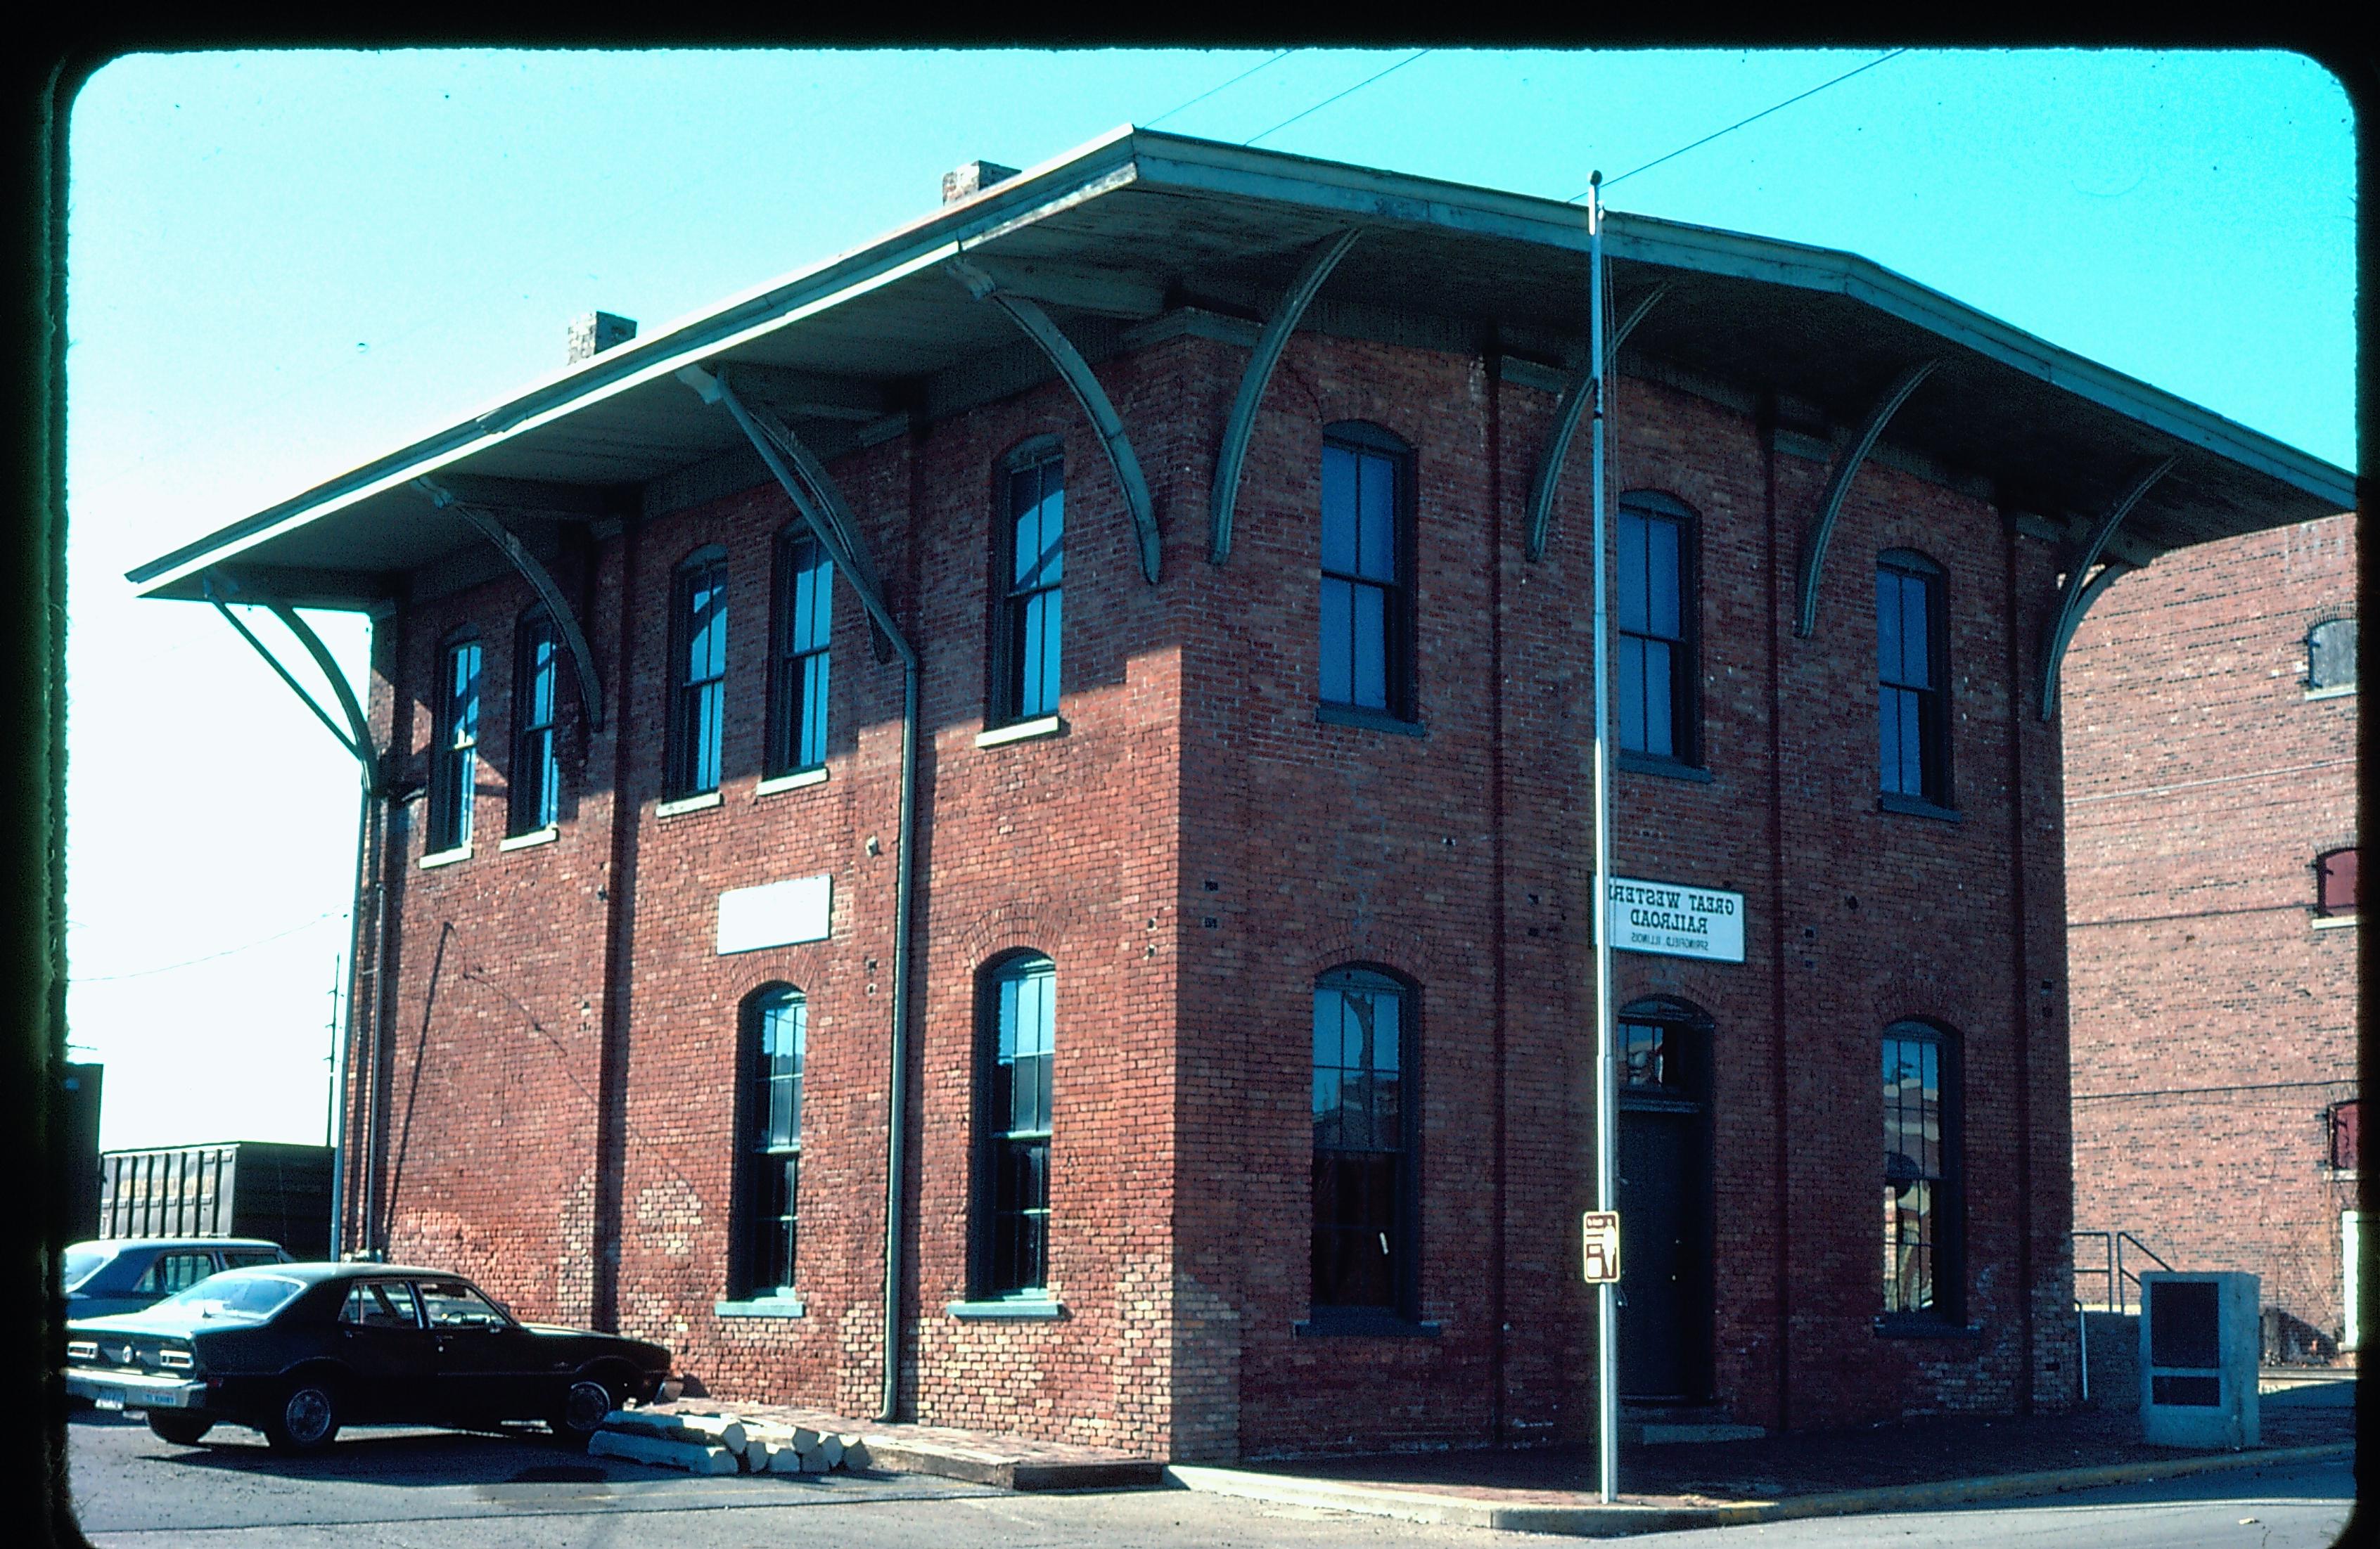 Great Western Railroad station (front and side).. Great Western Depot, Train Station